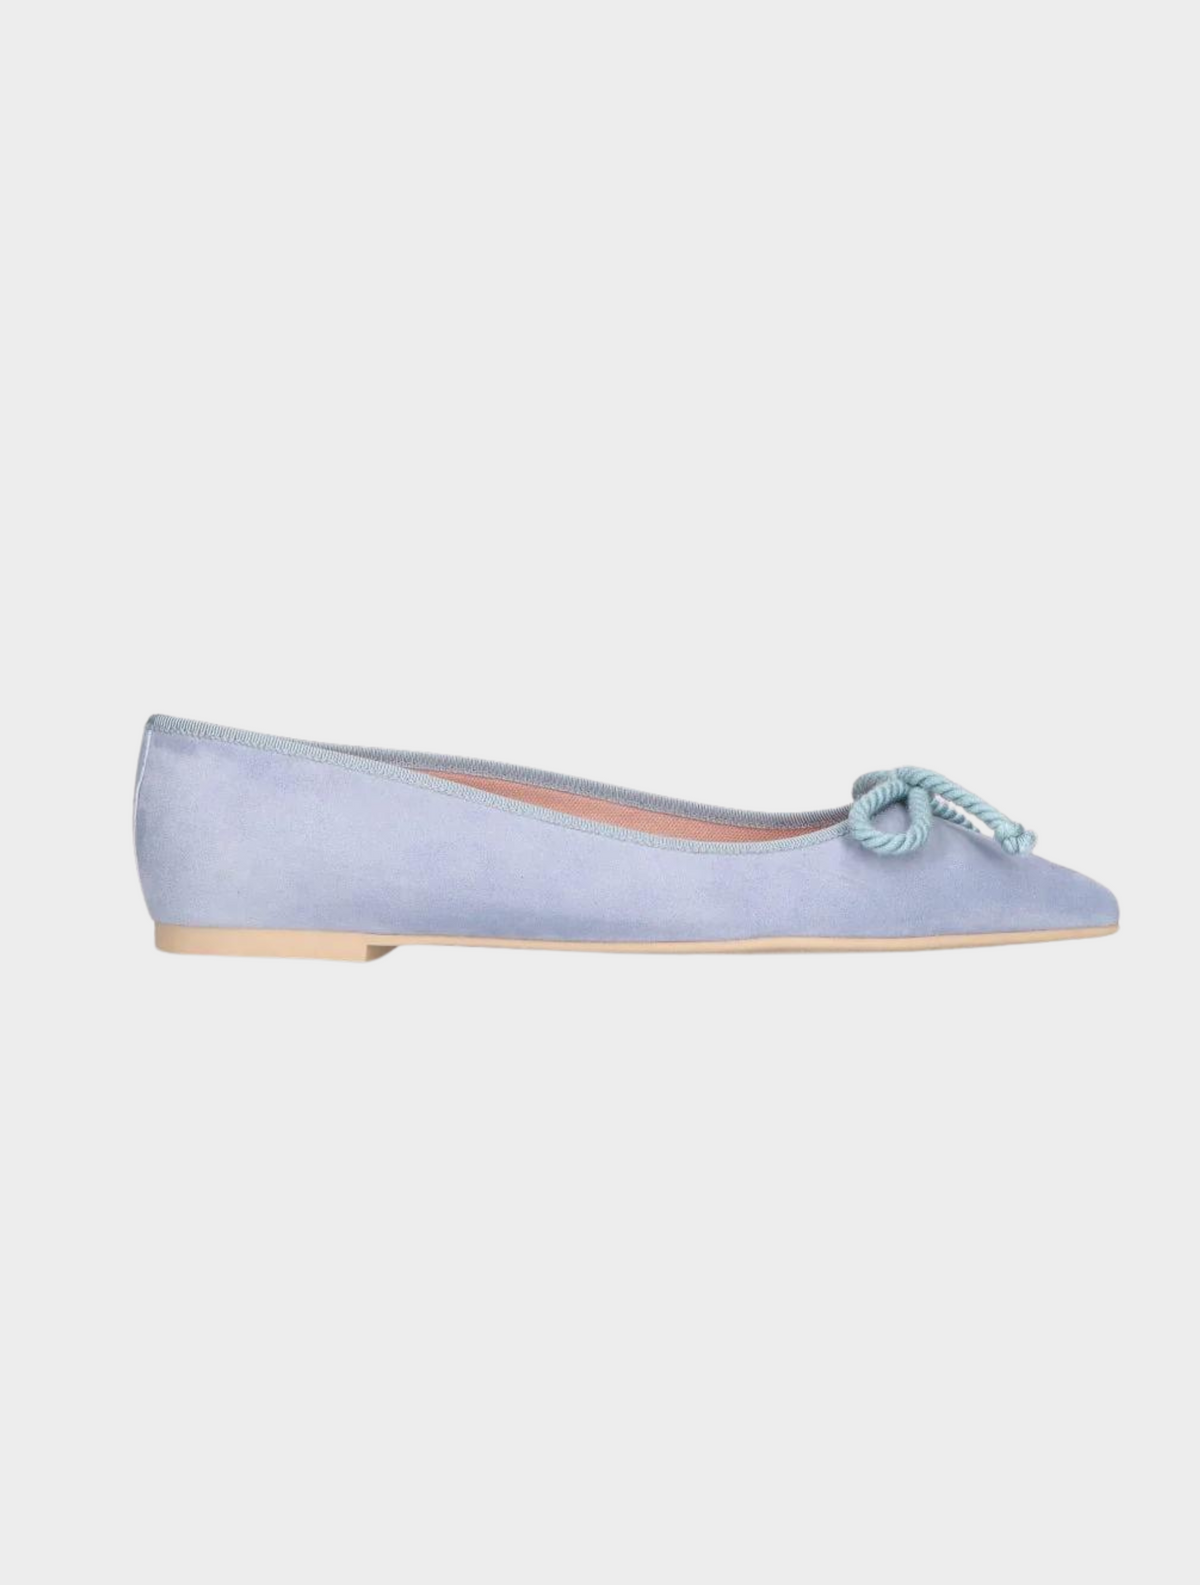 Light blue pointed toe ballet pump with rope bow